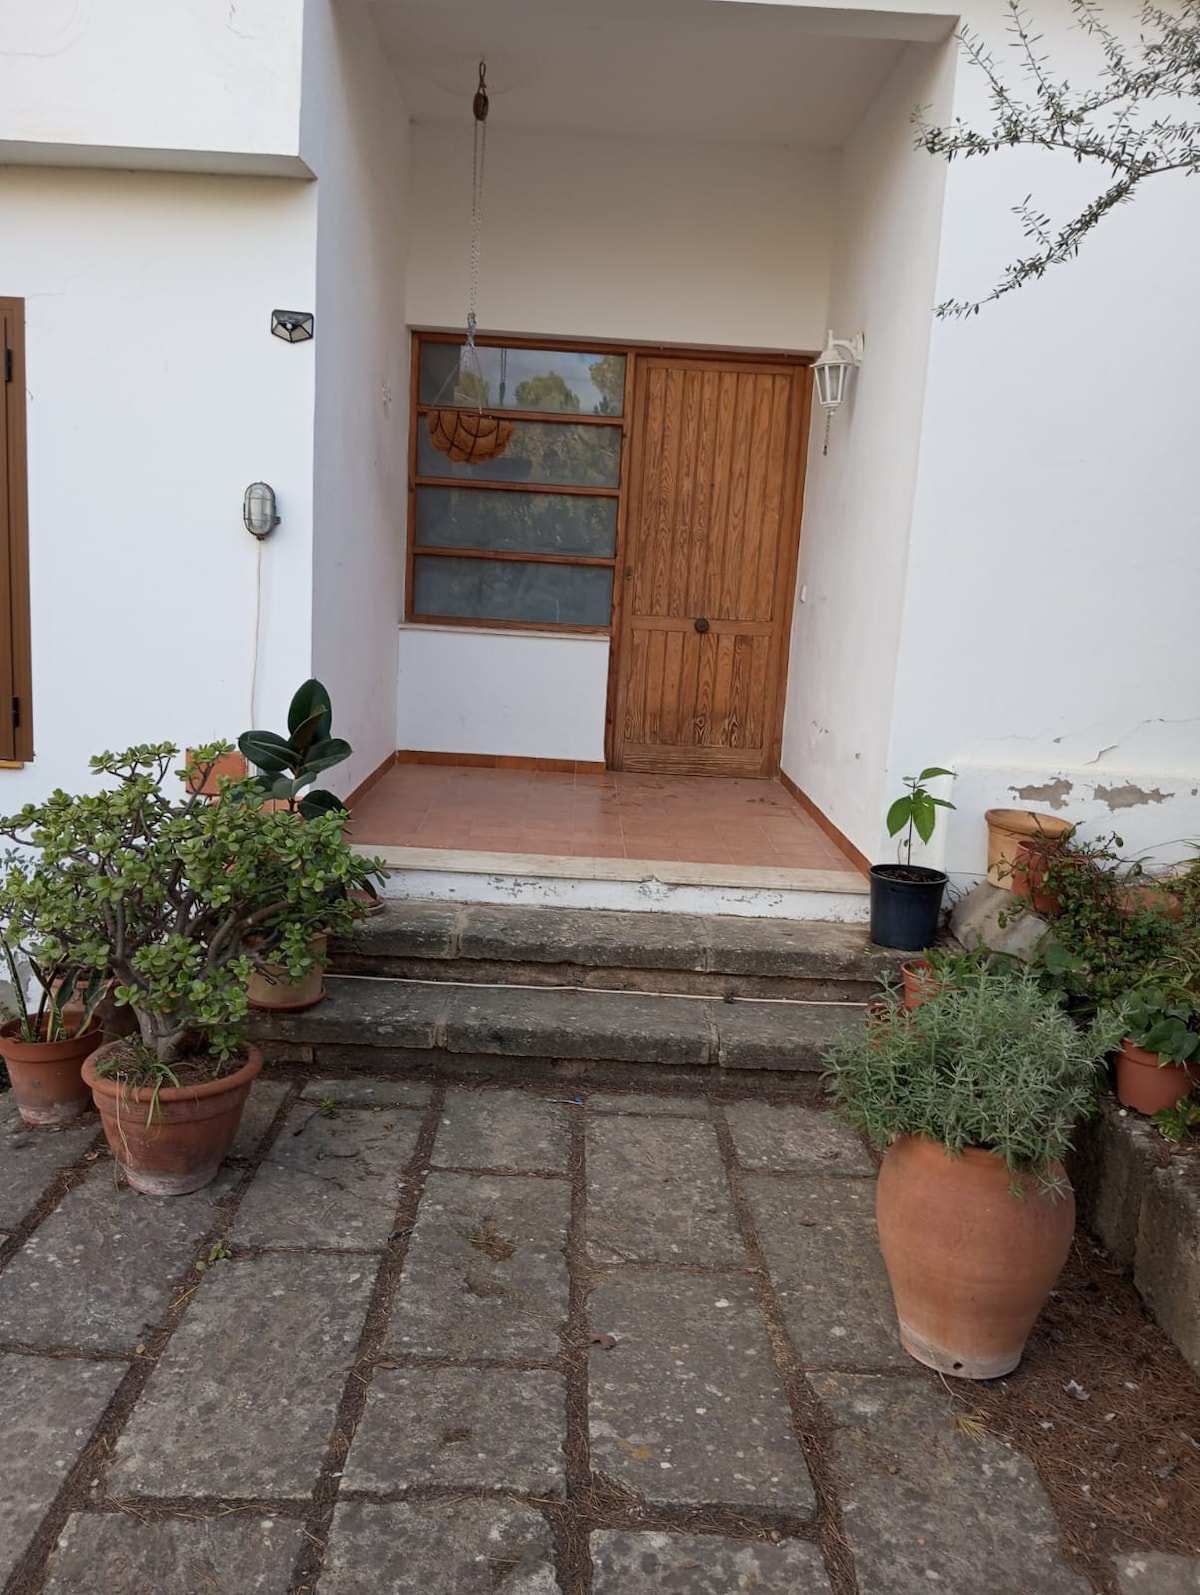 2 bedroom house a stone's throw from the beach.